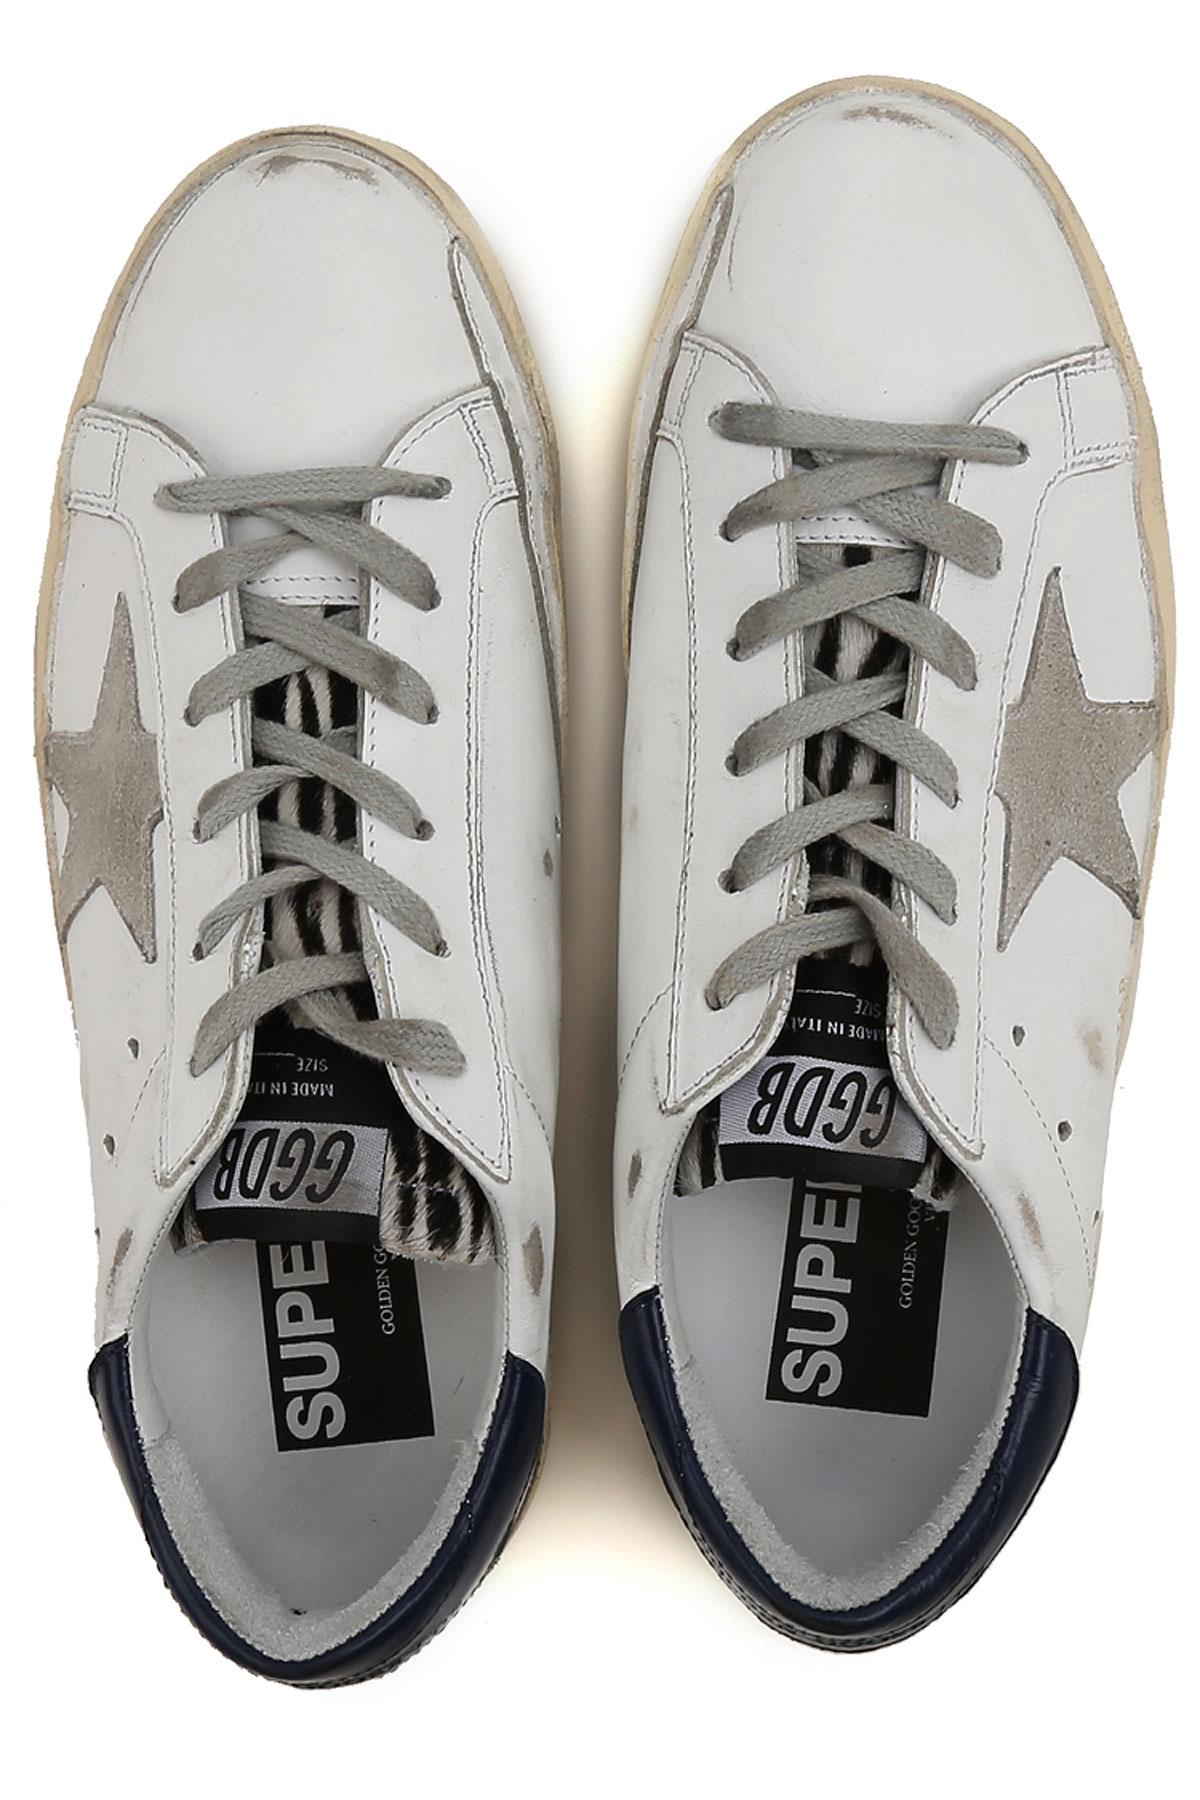 Golden Goose Deluxe Brand Goose Sneakers For Women On Sale in White - Lyst